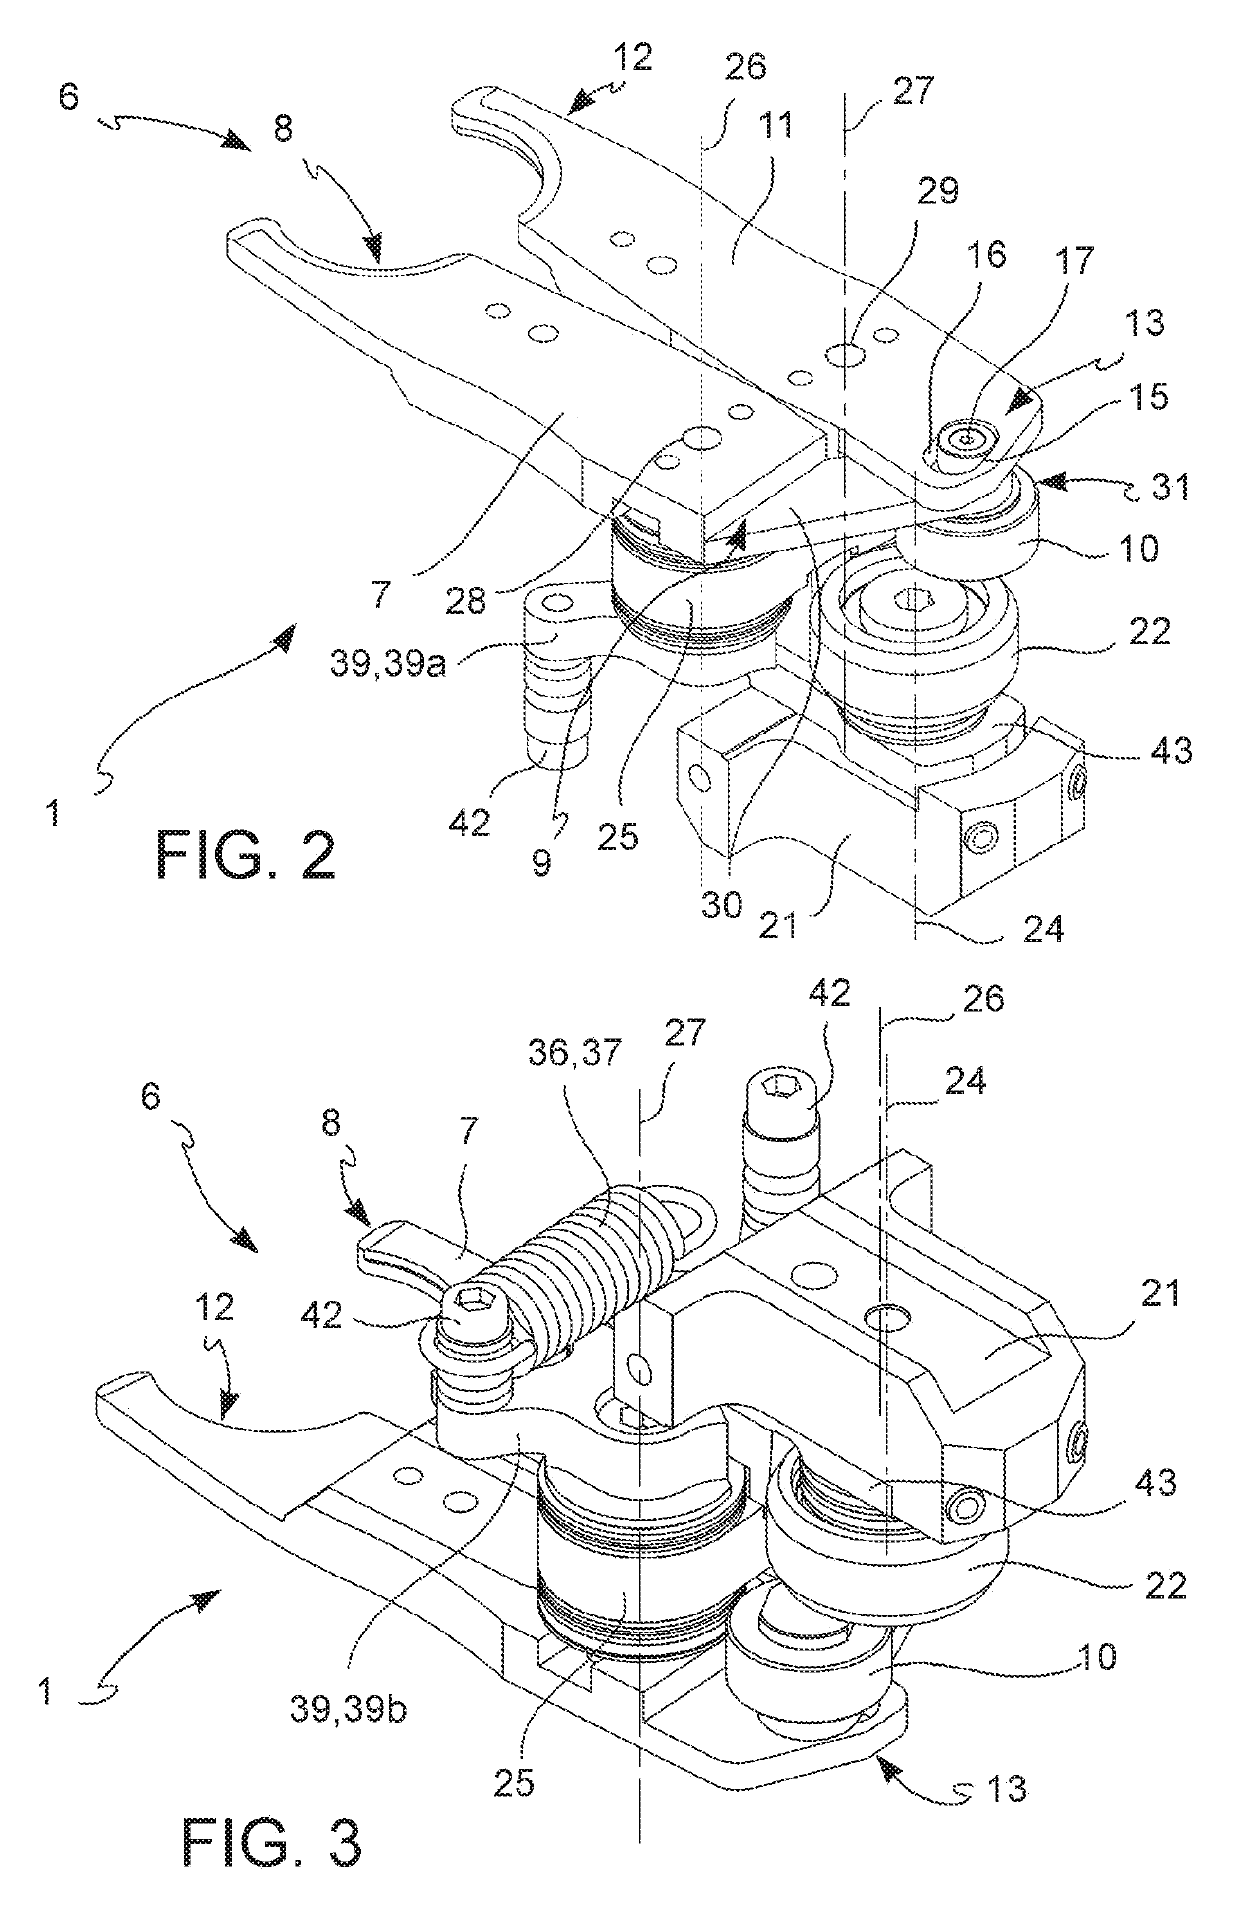 Handling device for containers provided with clamps for opening on command